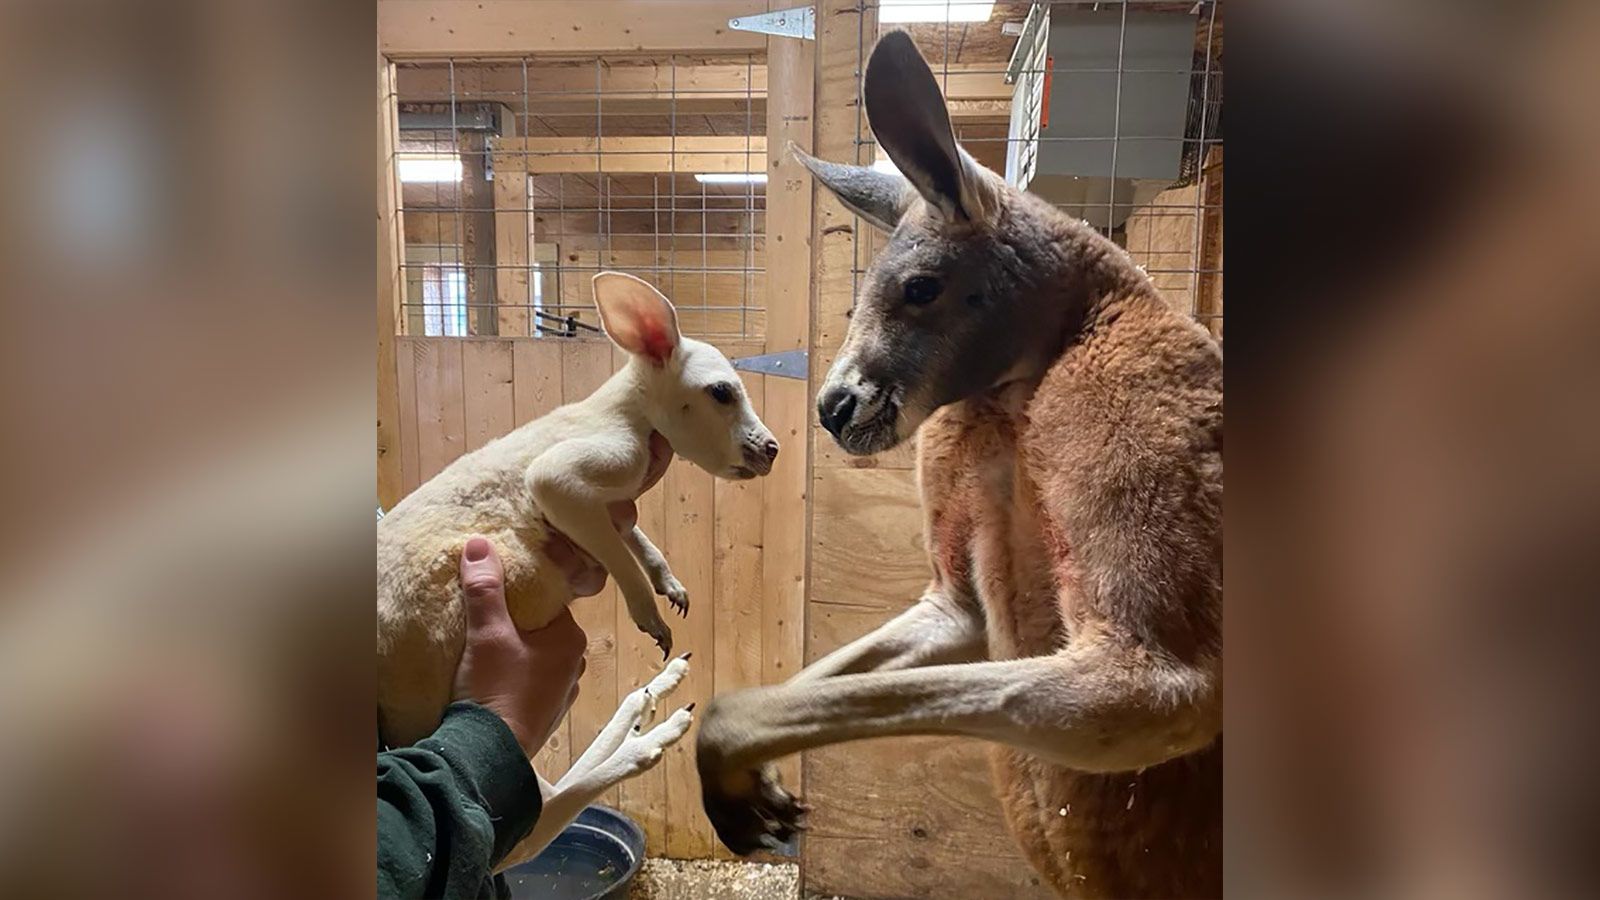 An extremely rare white kangaroo was born at a zoo in New York | CNN